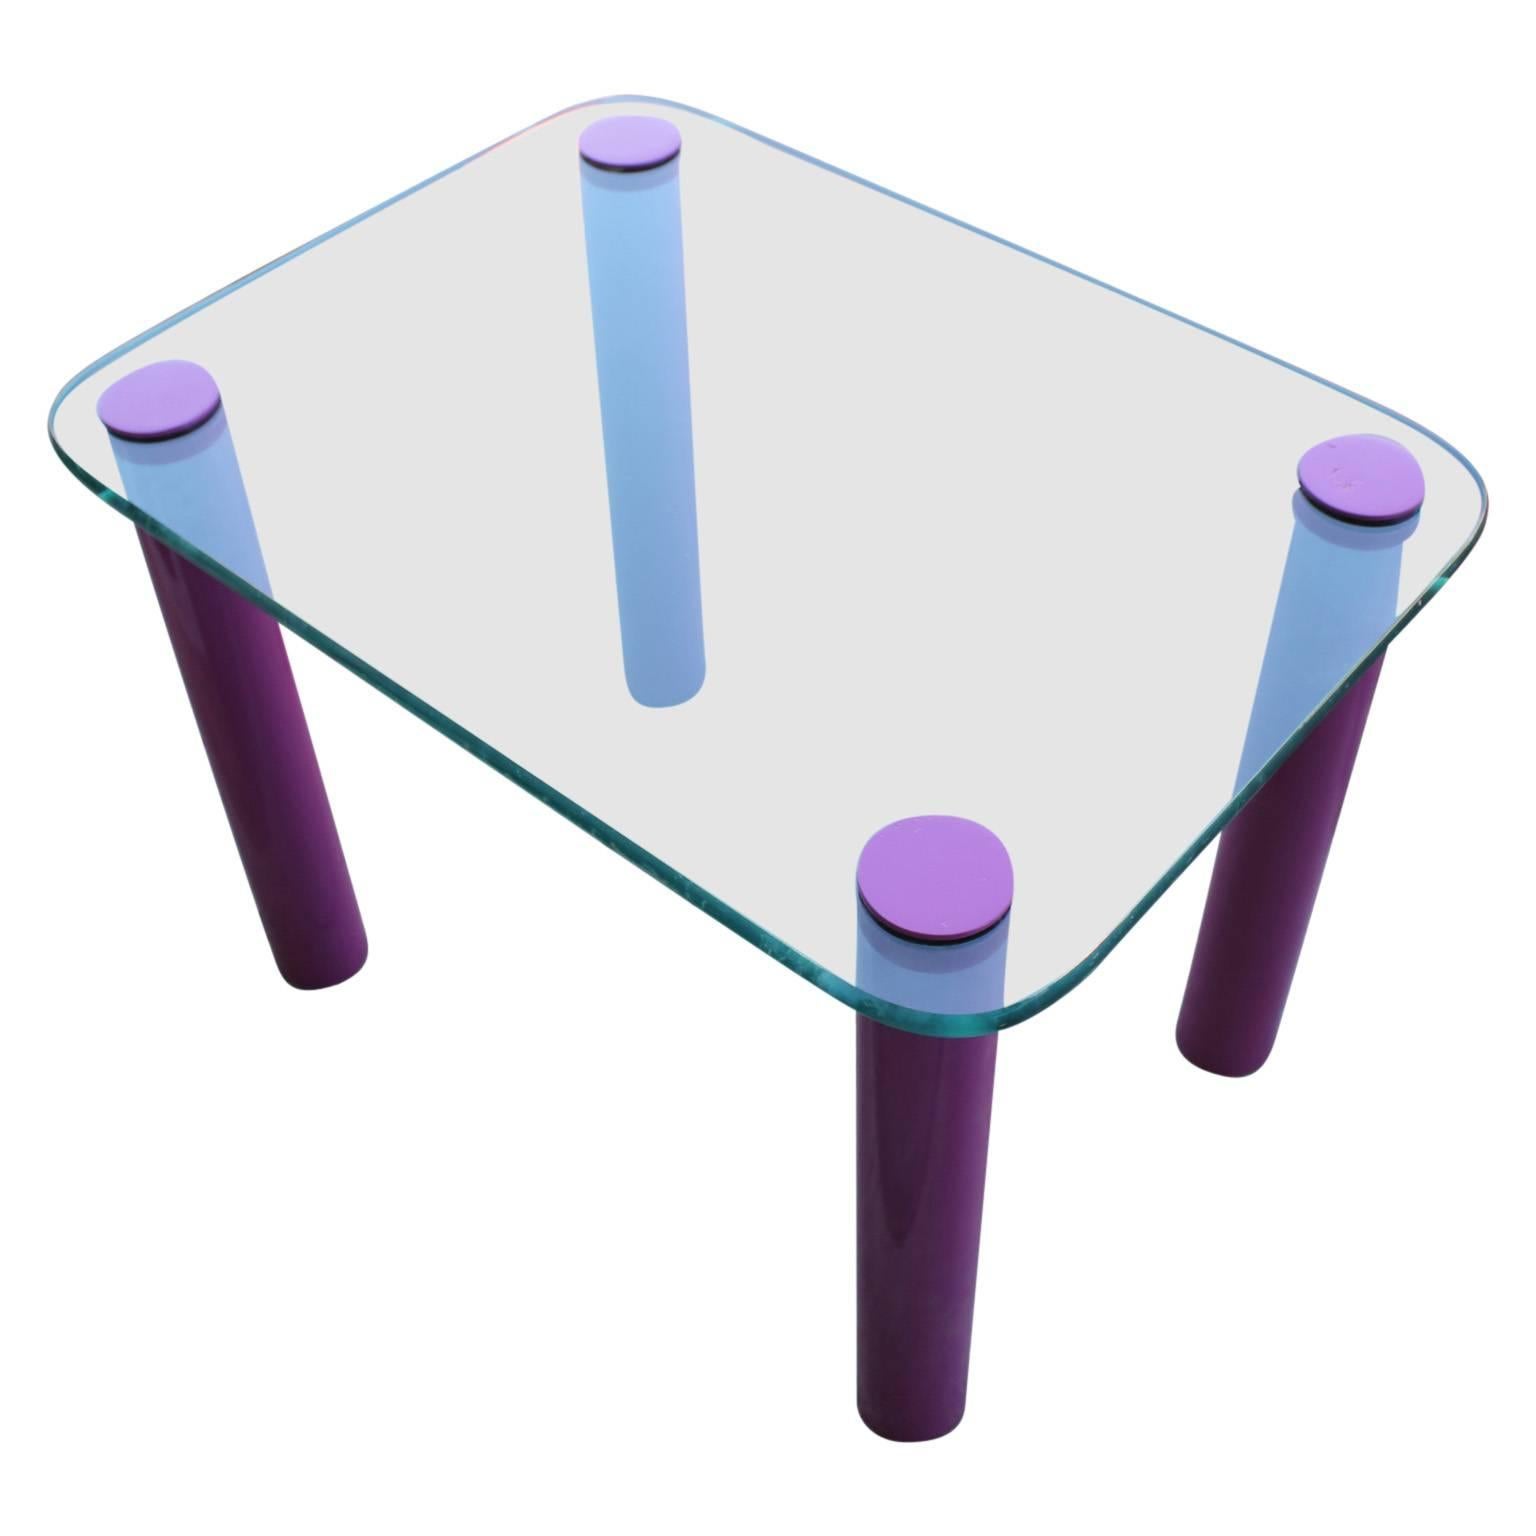 Unique rectangular glass side table with purple/pink legs.